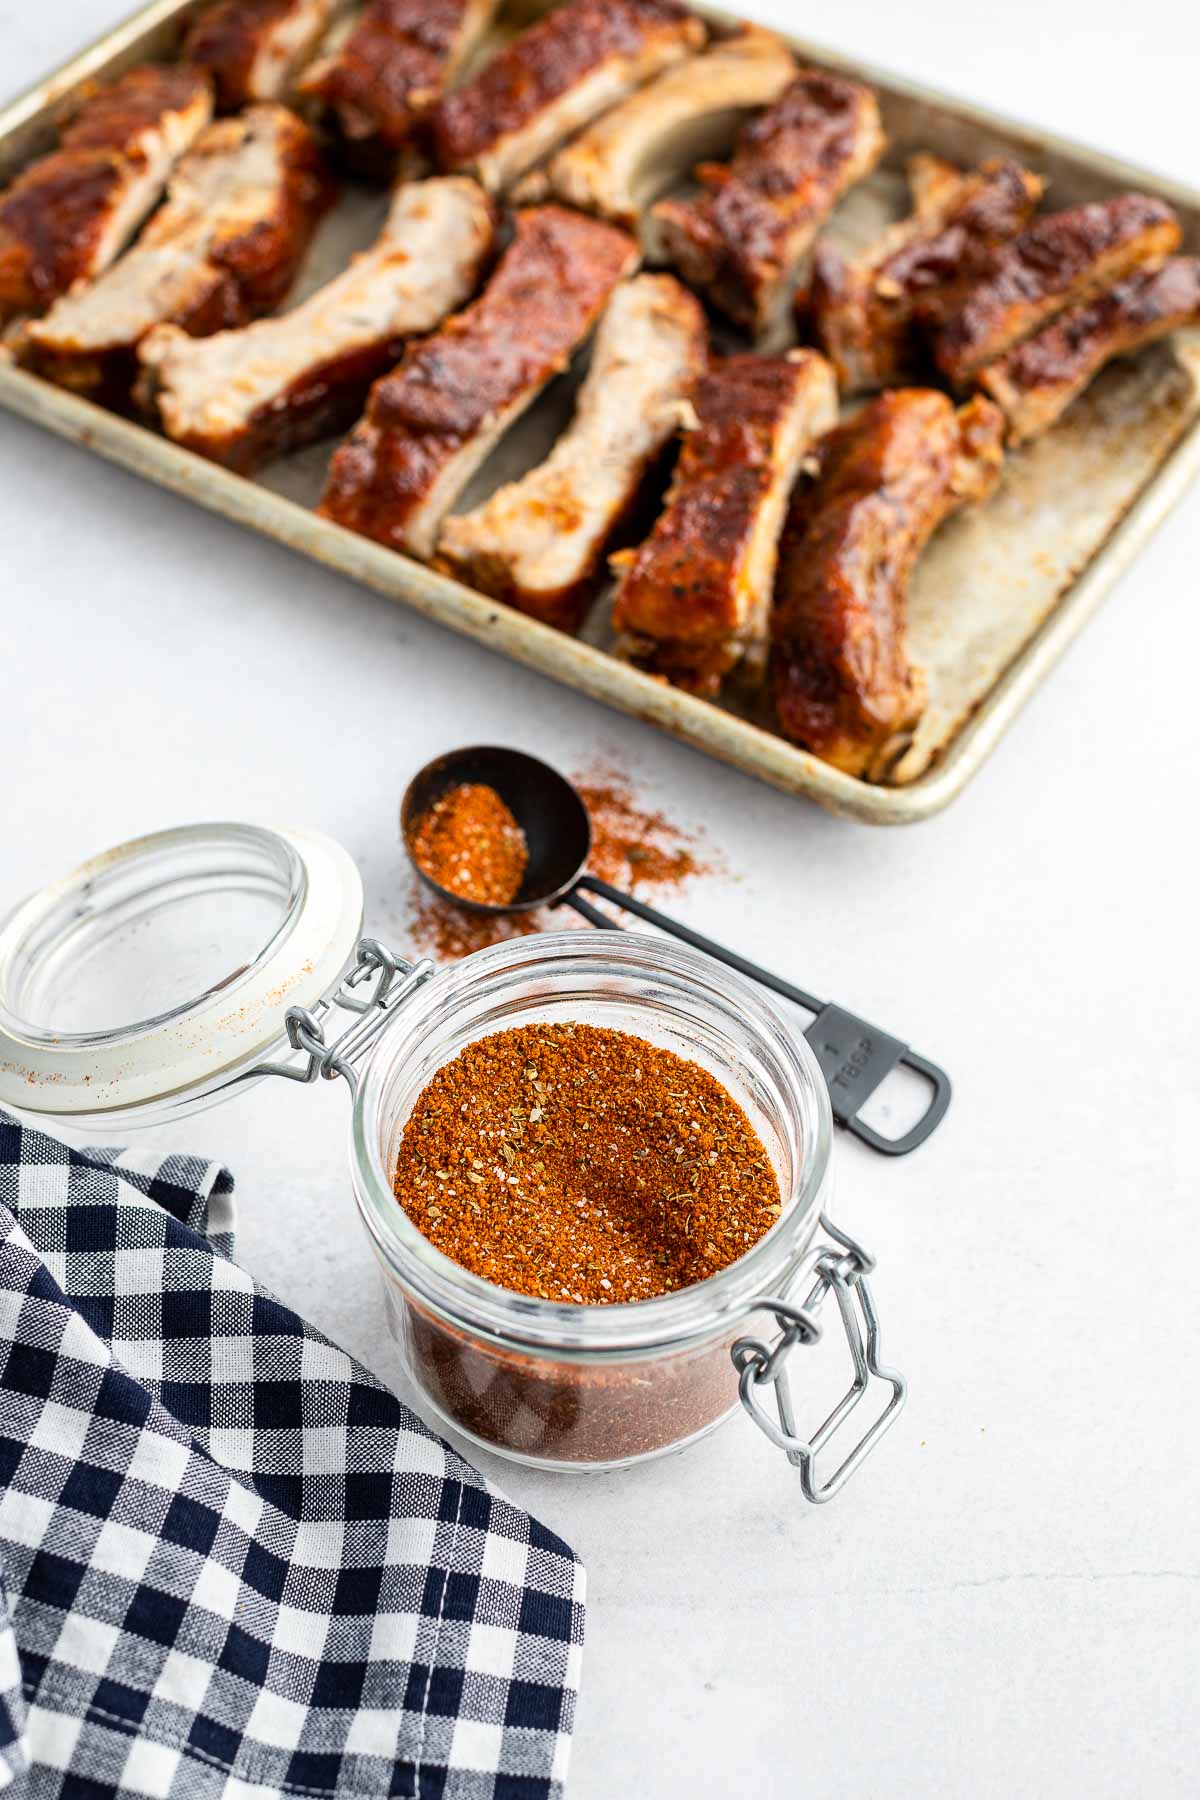 baking sheet of baby back ribs and dry rub for ribs